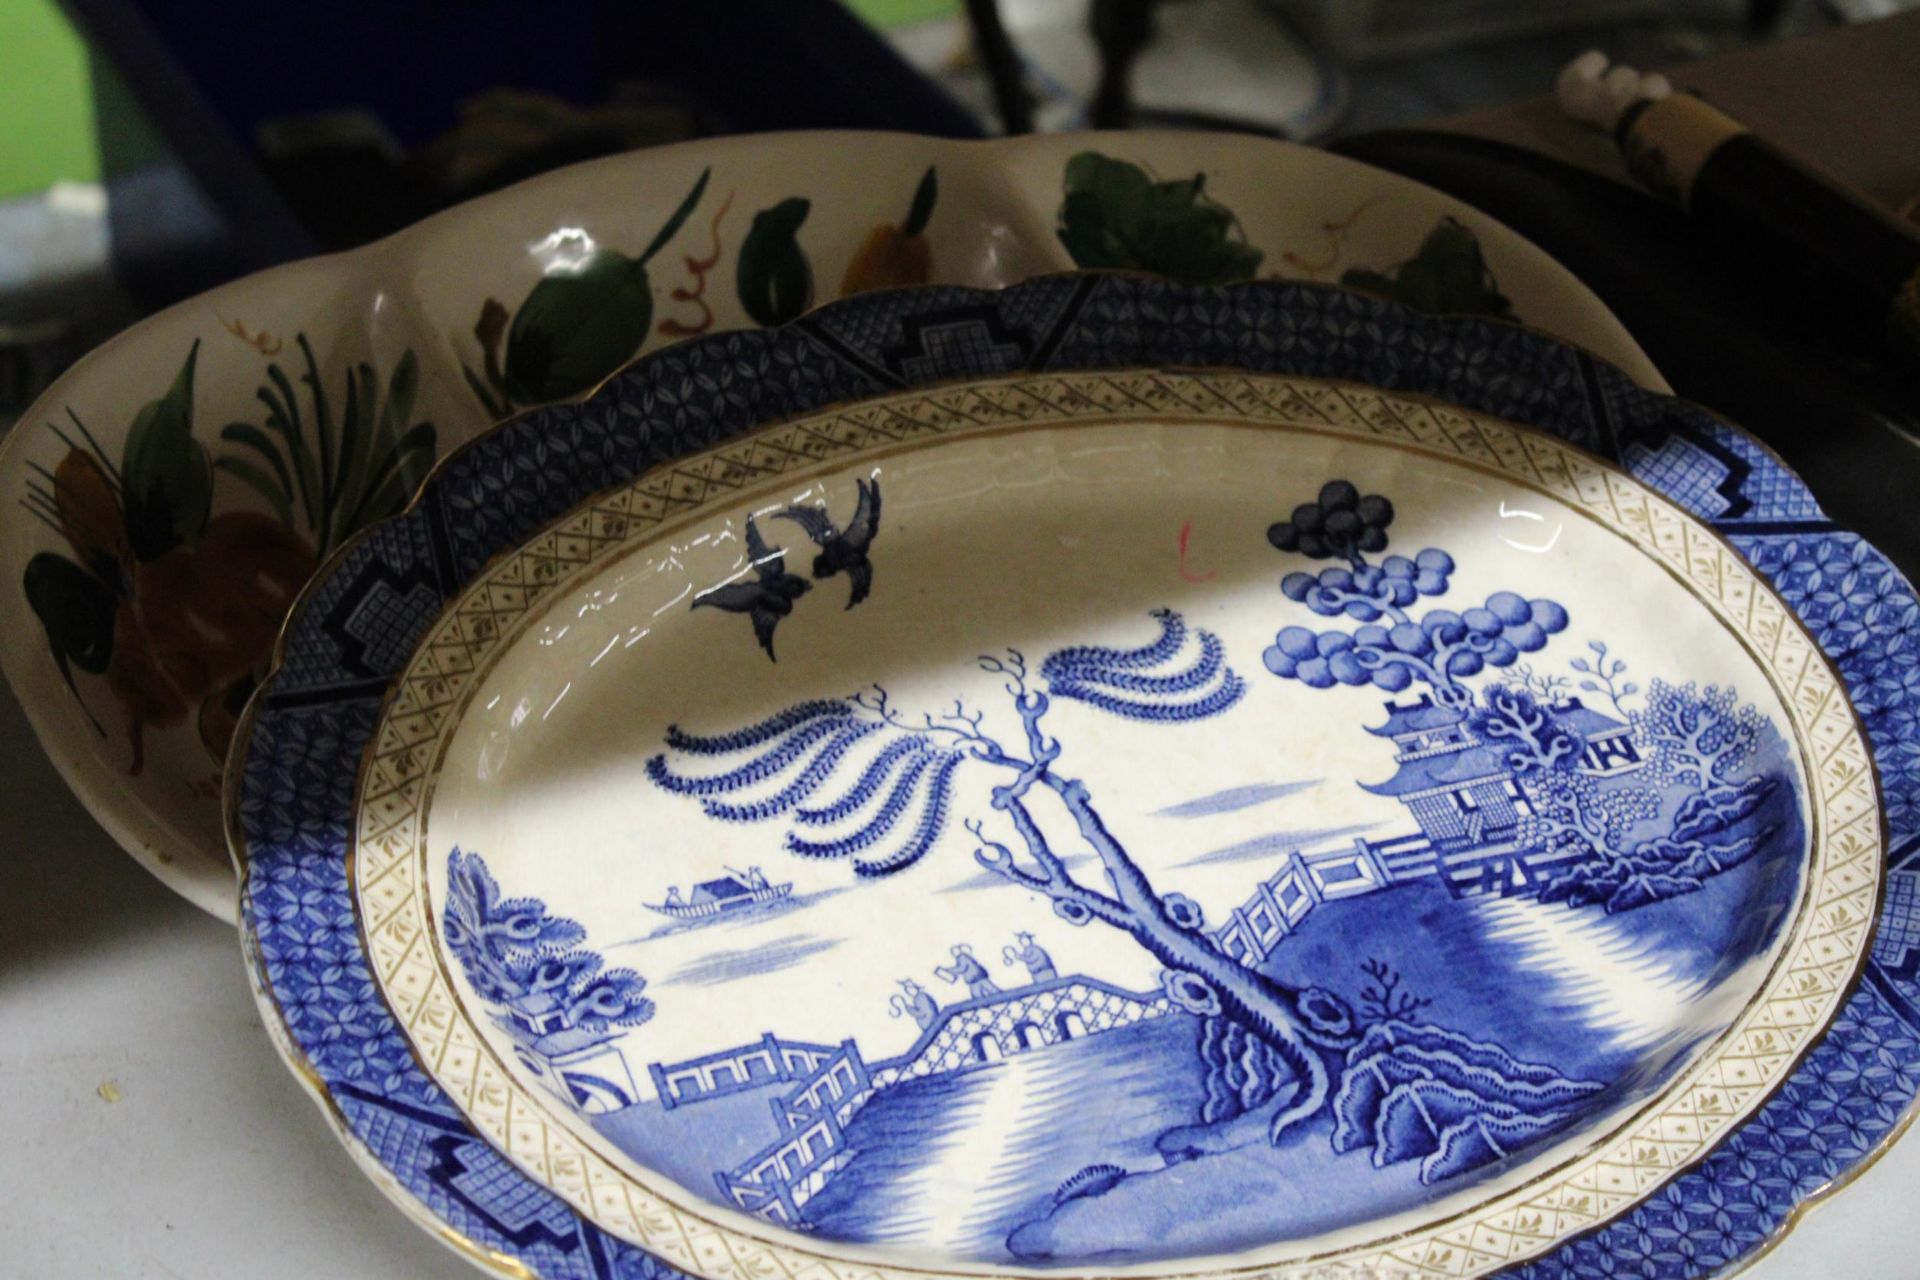 A QUANTITY OF COMMEMORATIVE CERAMICS TO INCLUDE PLATES, A CHEESE DISH AND A MUG, PLUS A LARGE WILLOW - Image 4 of 4